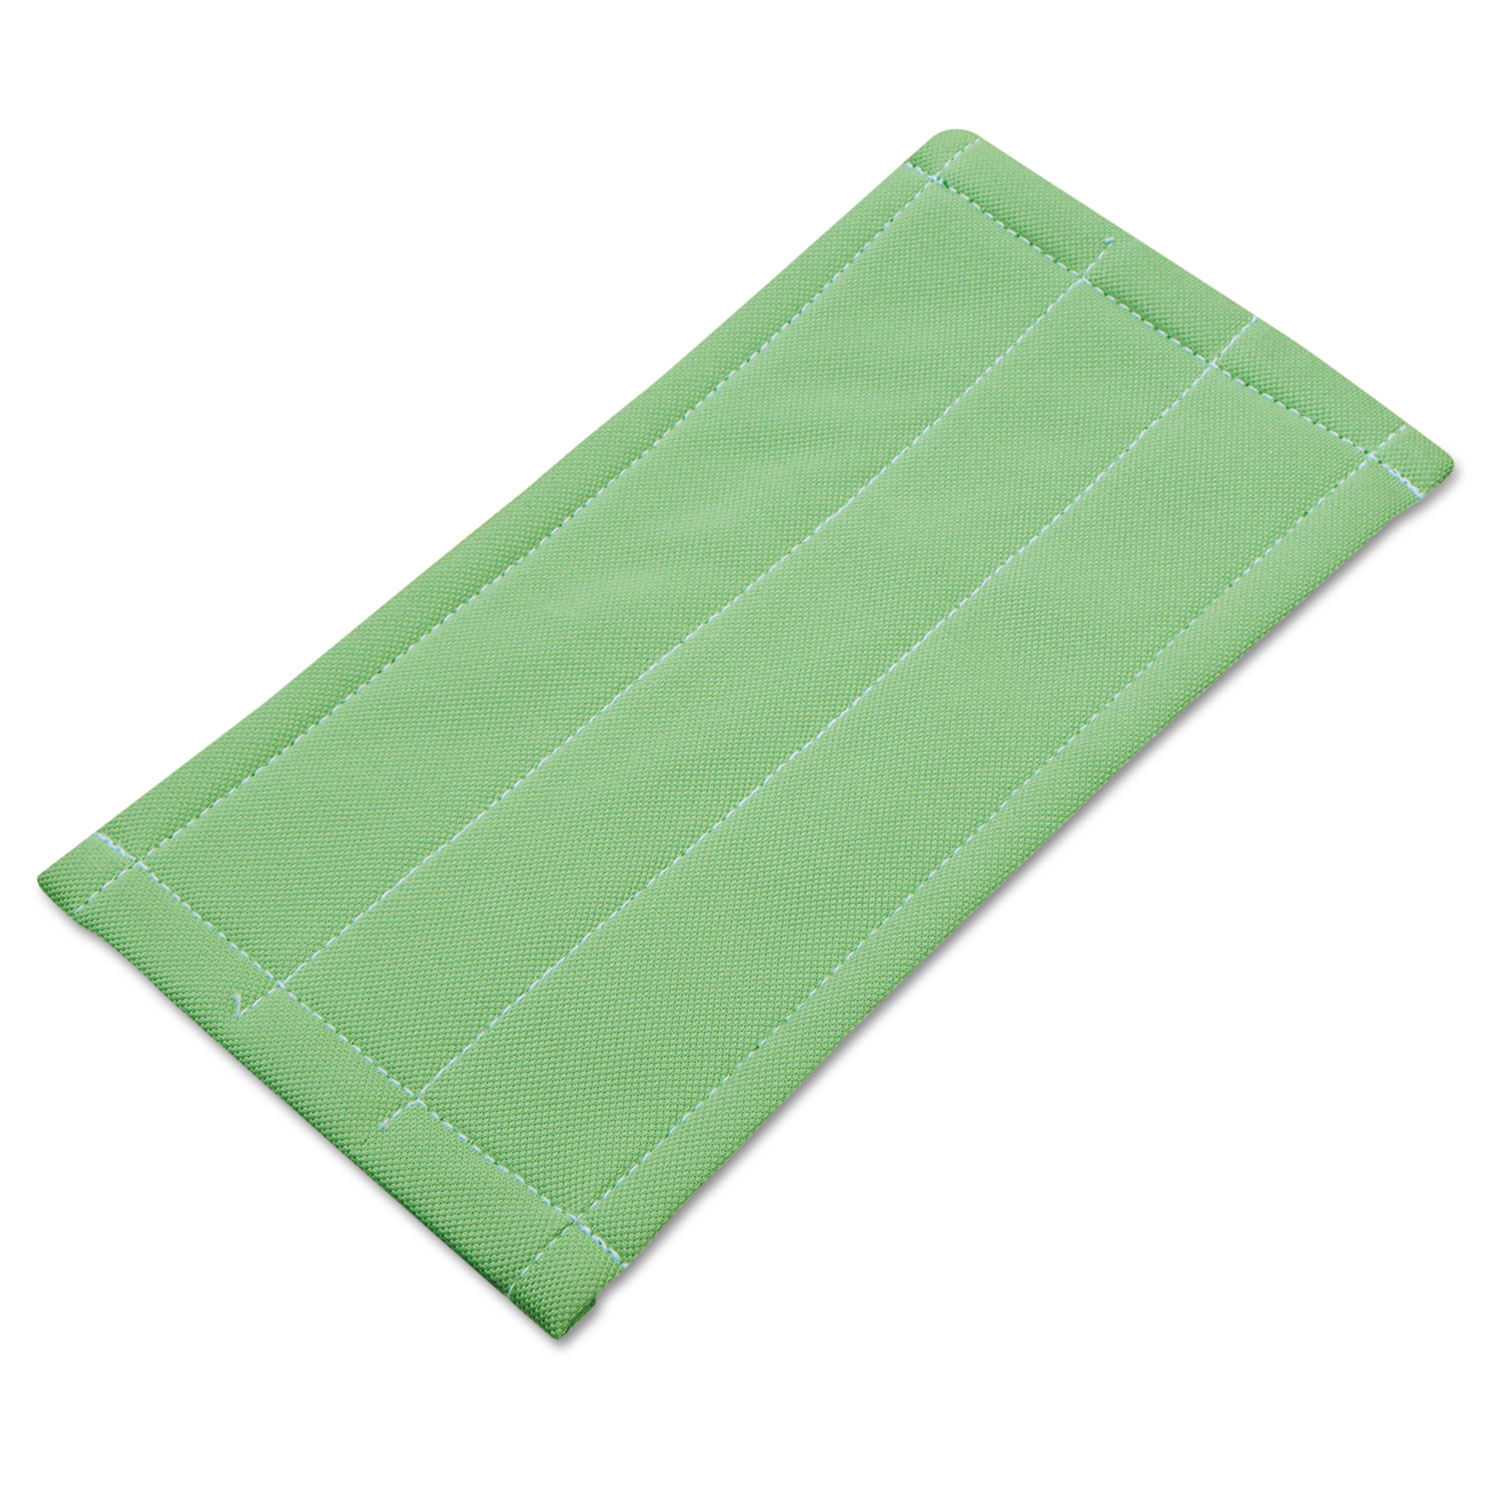  Unger PHL20 Microfiber Cleaning Pad, Green, 6 x 8 (UNGPHL20) 